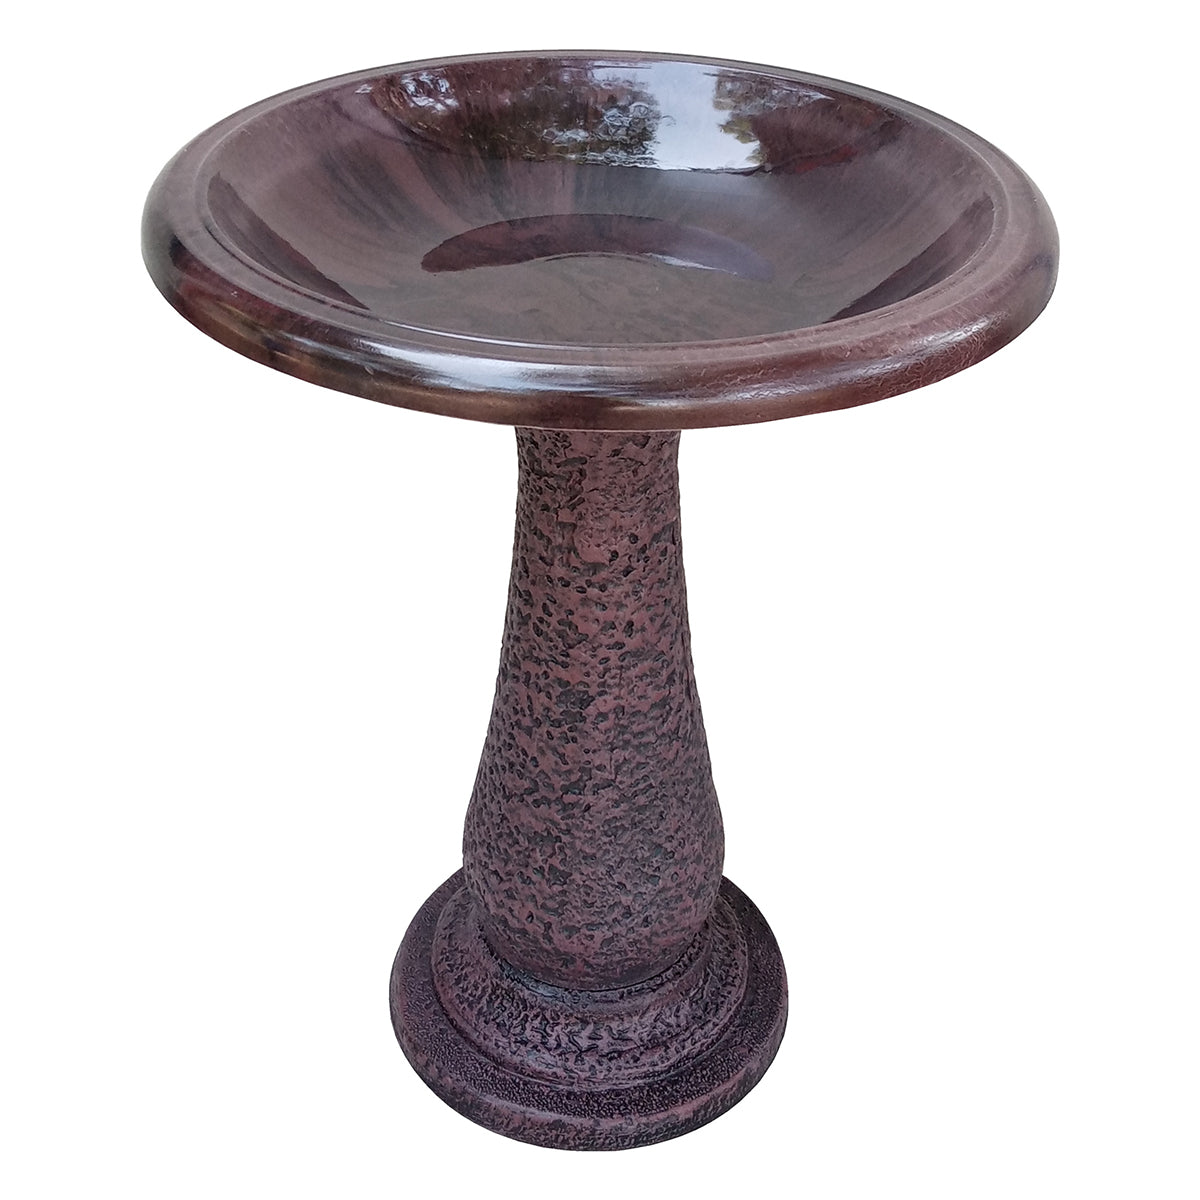 Antique Brown Fiber Clay Birdbath. Made of 70% clay, 25% plastic, and 5% fiber. Impact and shatter-resistant. UV protection. 19&quot;D x 24&quot;H 21&quot;H base, 8 lbs.